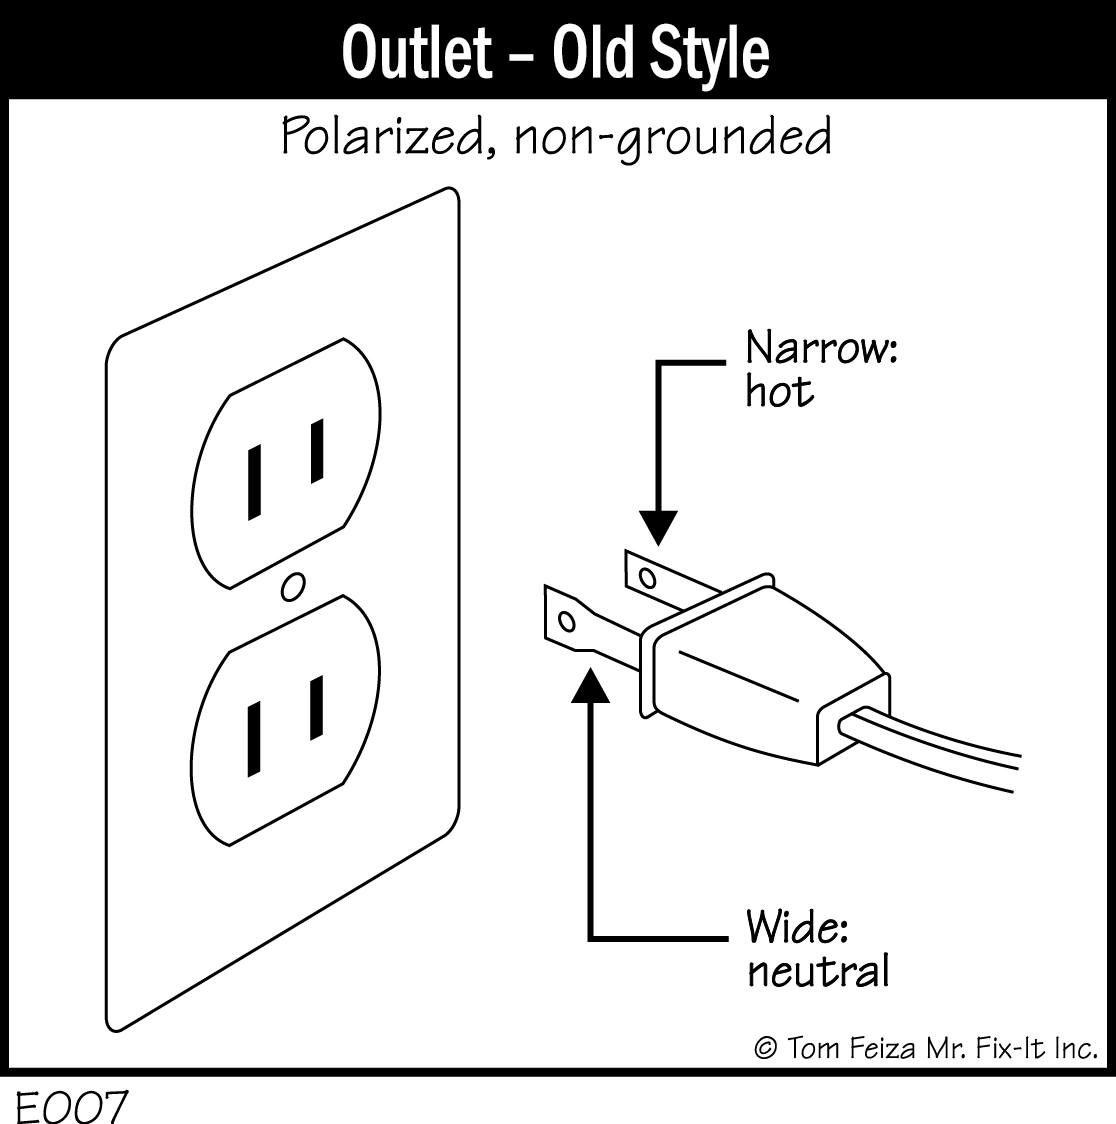 E007 - Outlet - Old Style